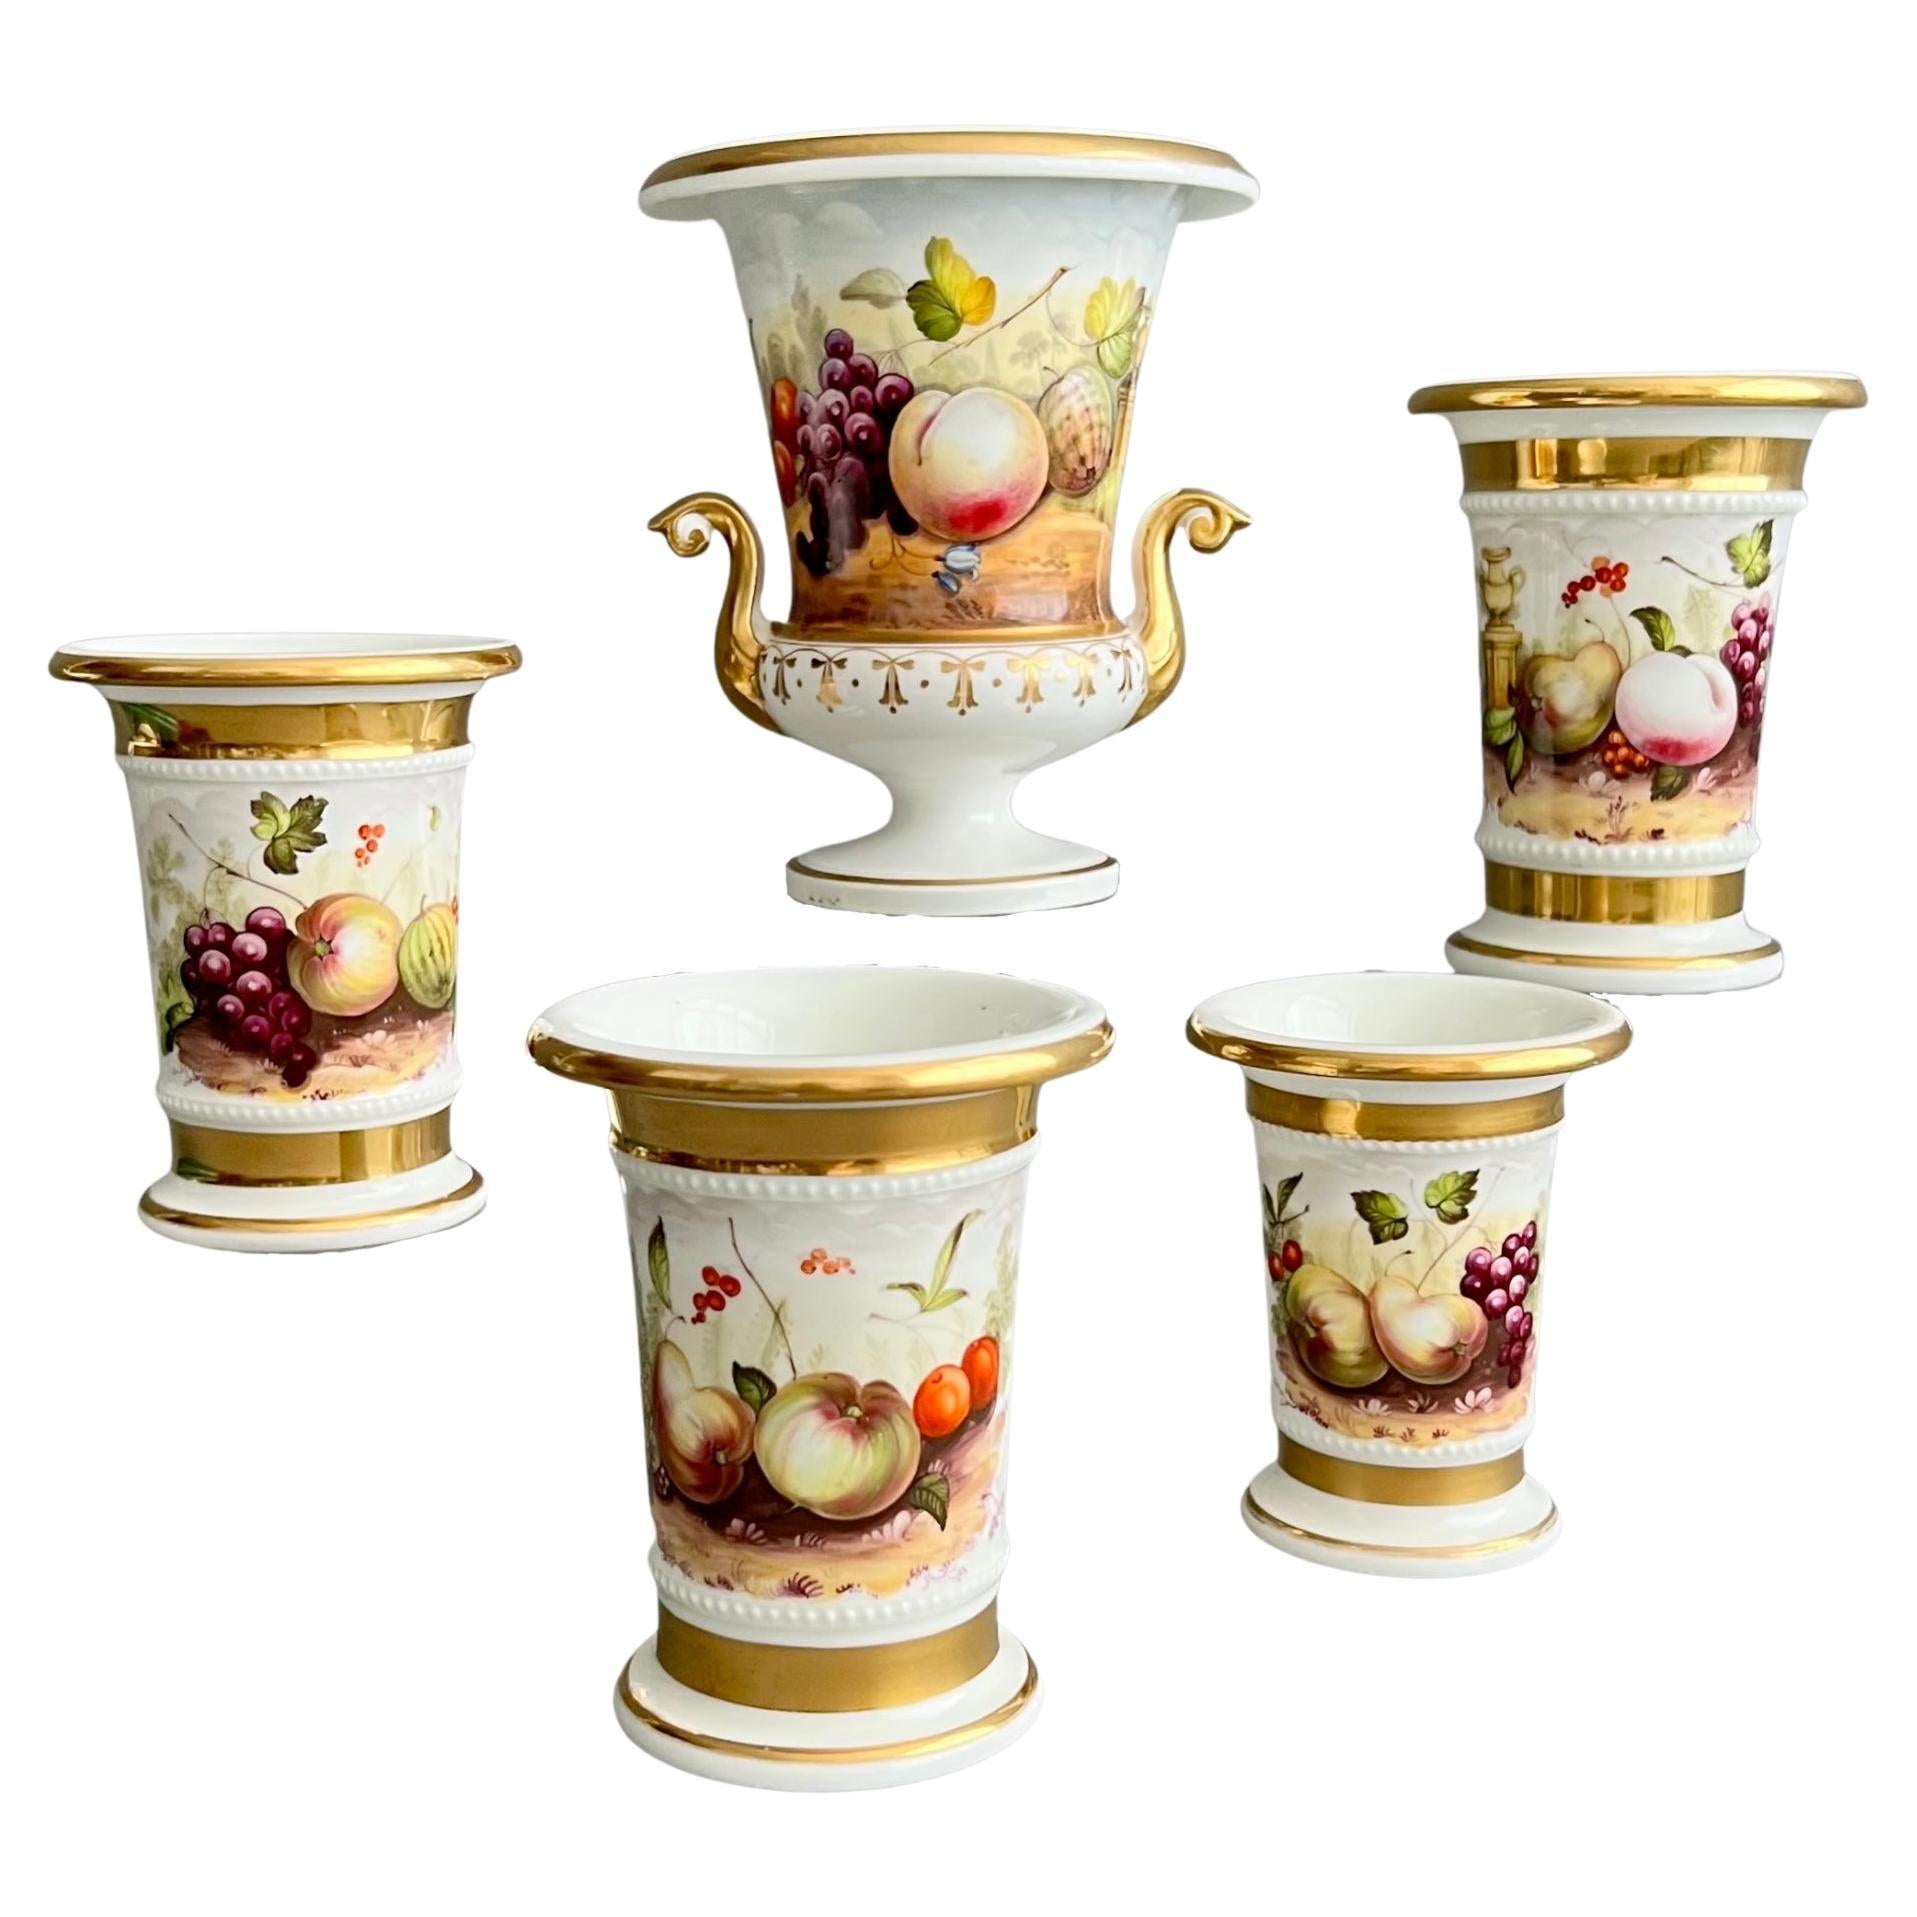 English Garniture of 5 Porcelain Vases, White, Hand Painted Fruits, 1820-1825 For Sale